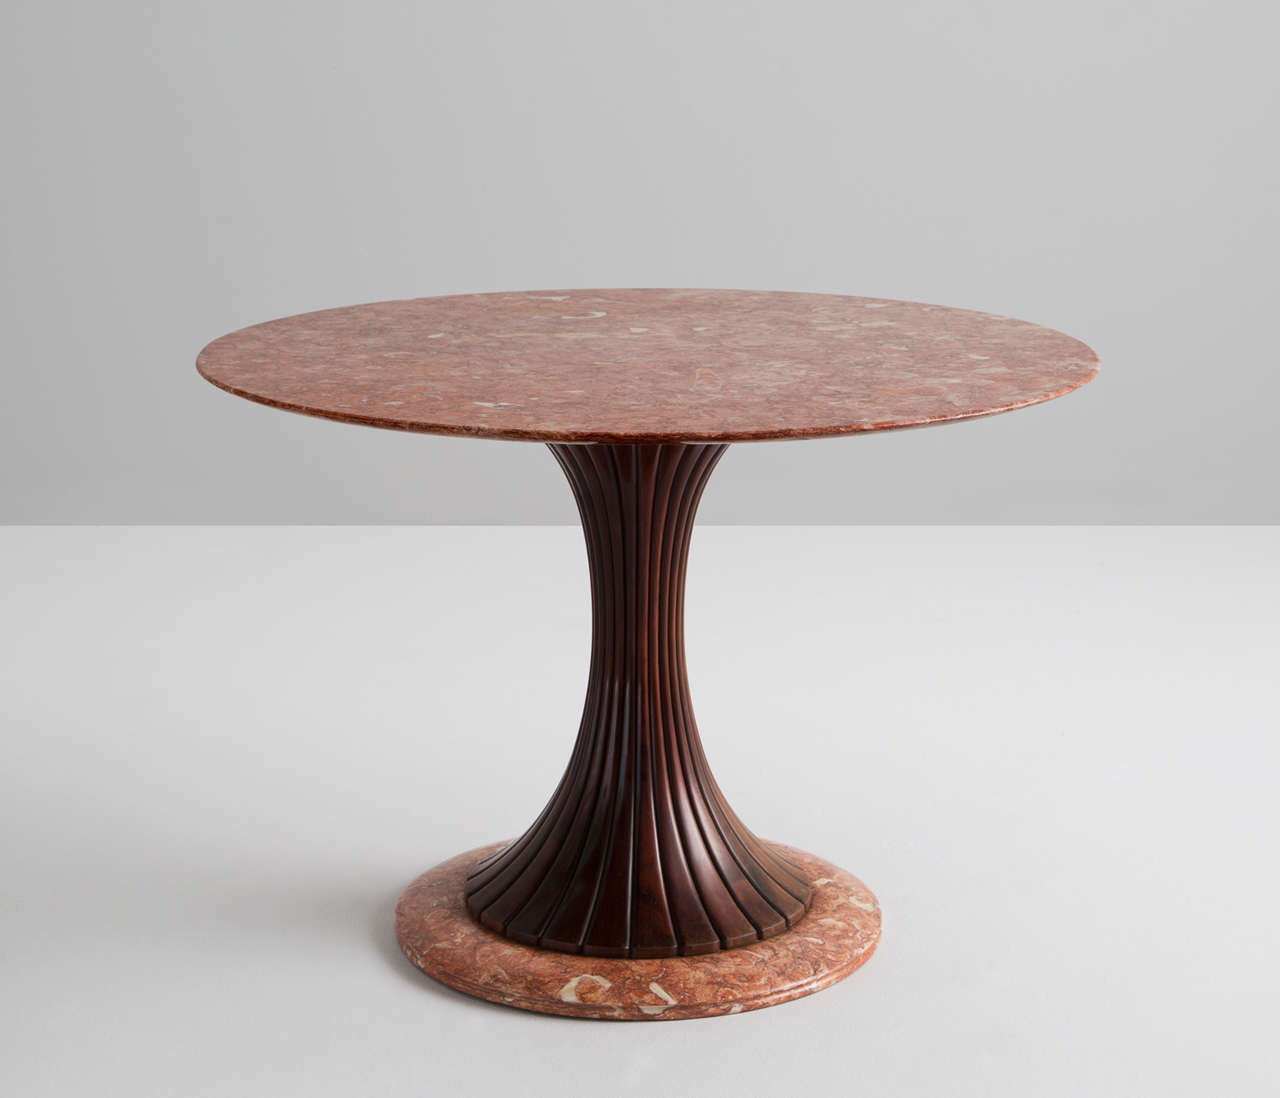 Osvaldo Borsani for Arredamento Borsani, marble wood, Italy, 1950s.

This distinctive centre table is made in the 1950s and holds a wooden decorated shaft. The main feature of this table is the red marble-top. The white and grey veins give a